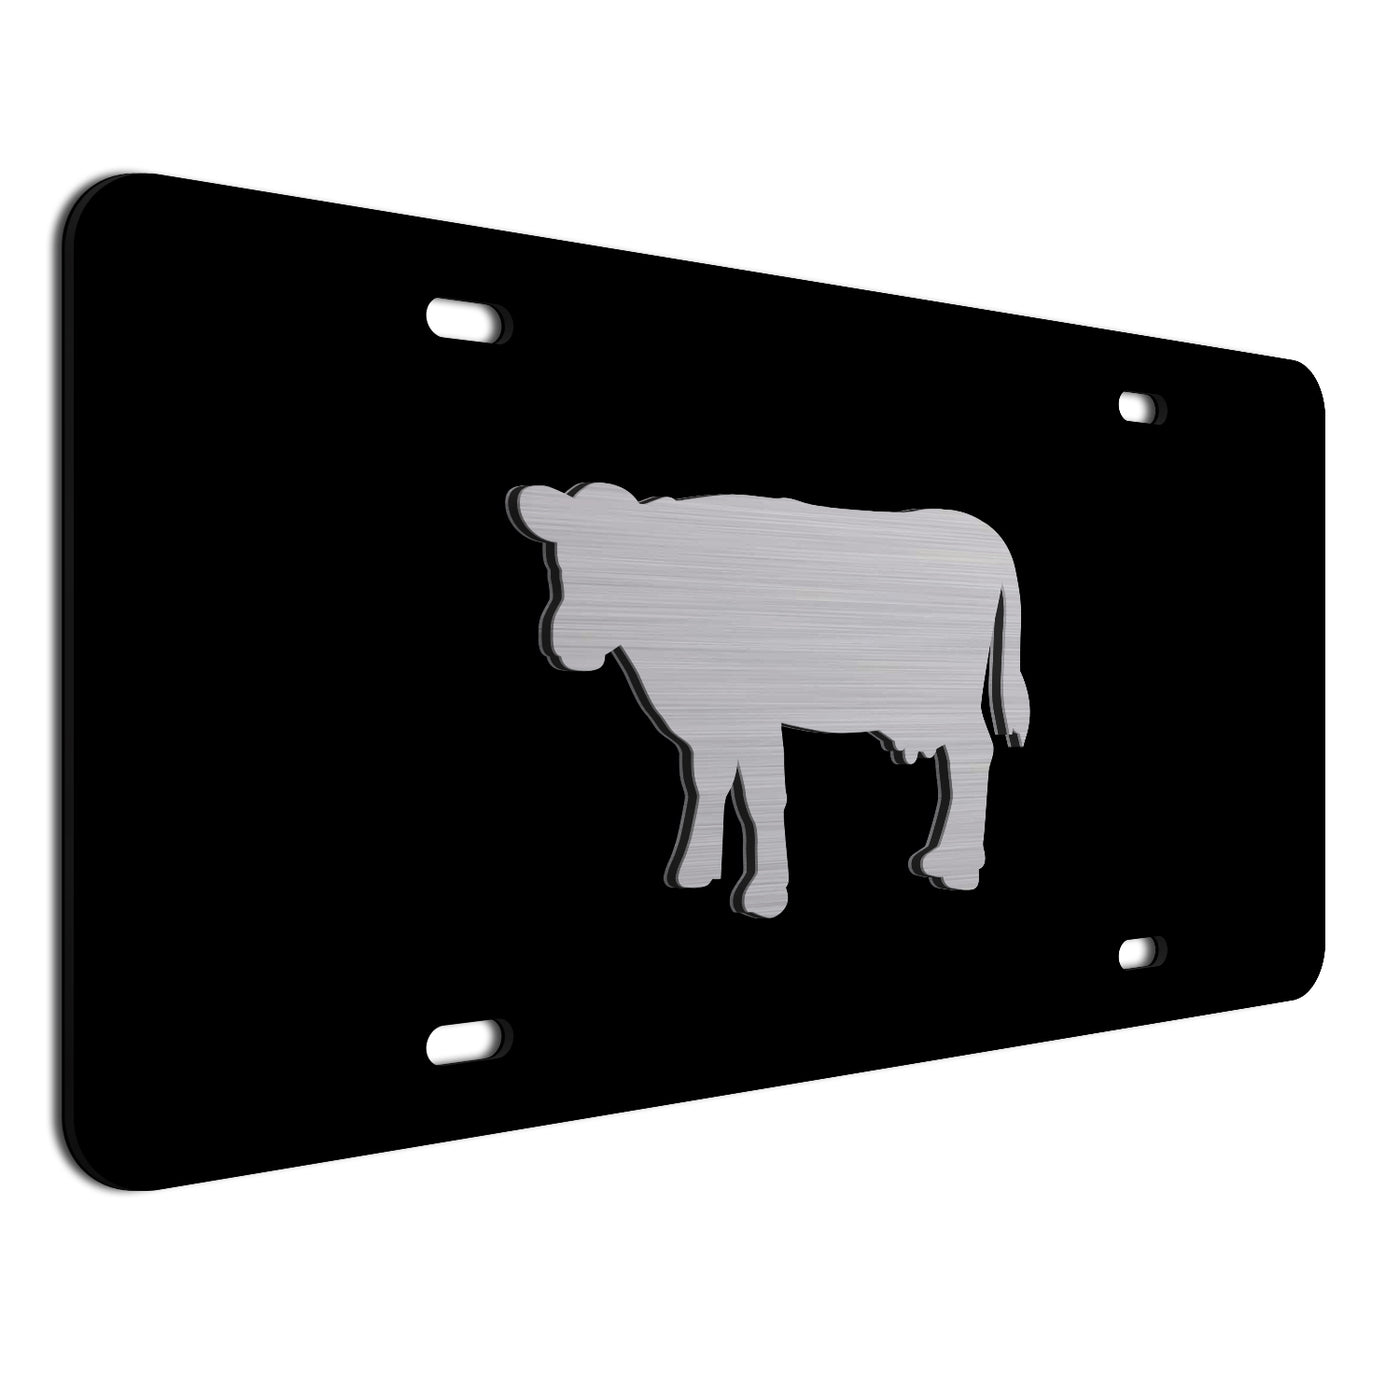 3-D Cow/Cattle License Plate. Car tag for cattle farmers and ranchers. Great gift that is Made in the USA.